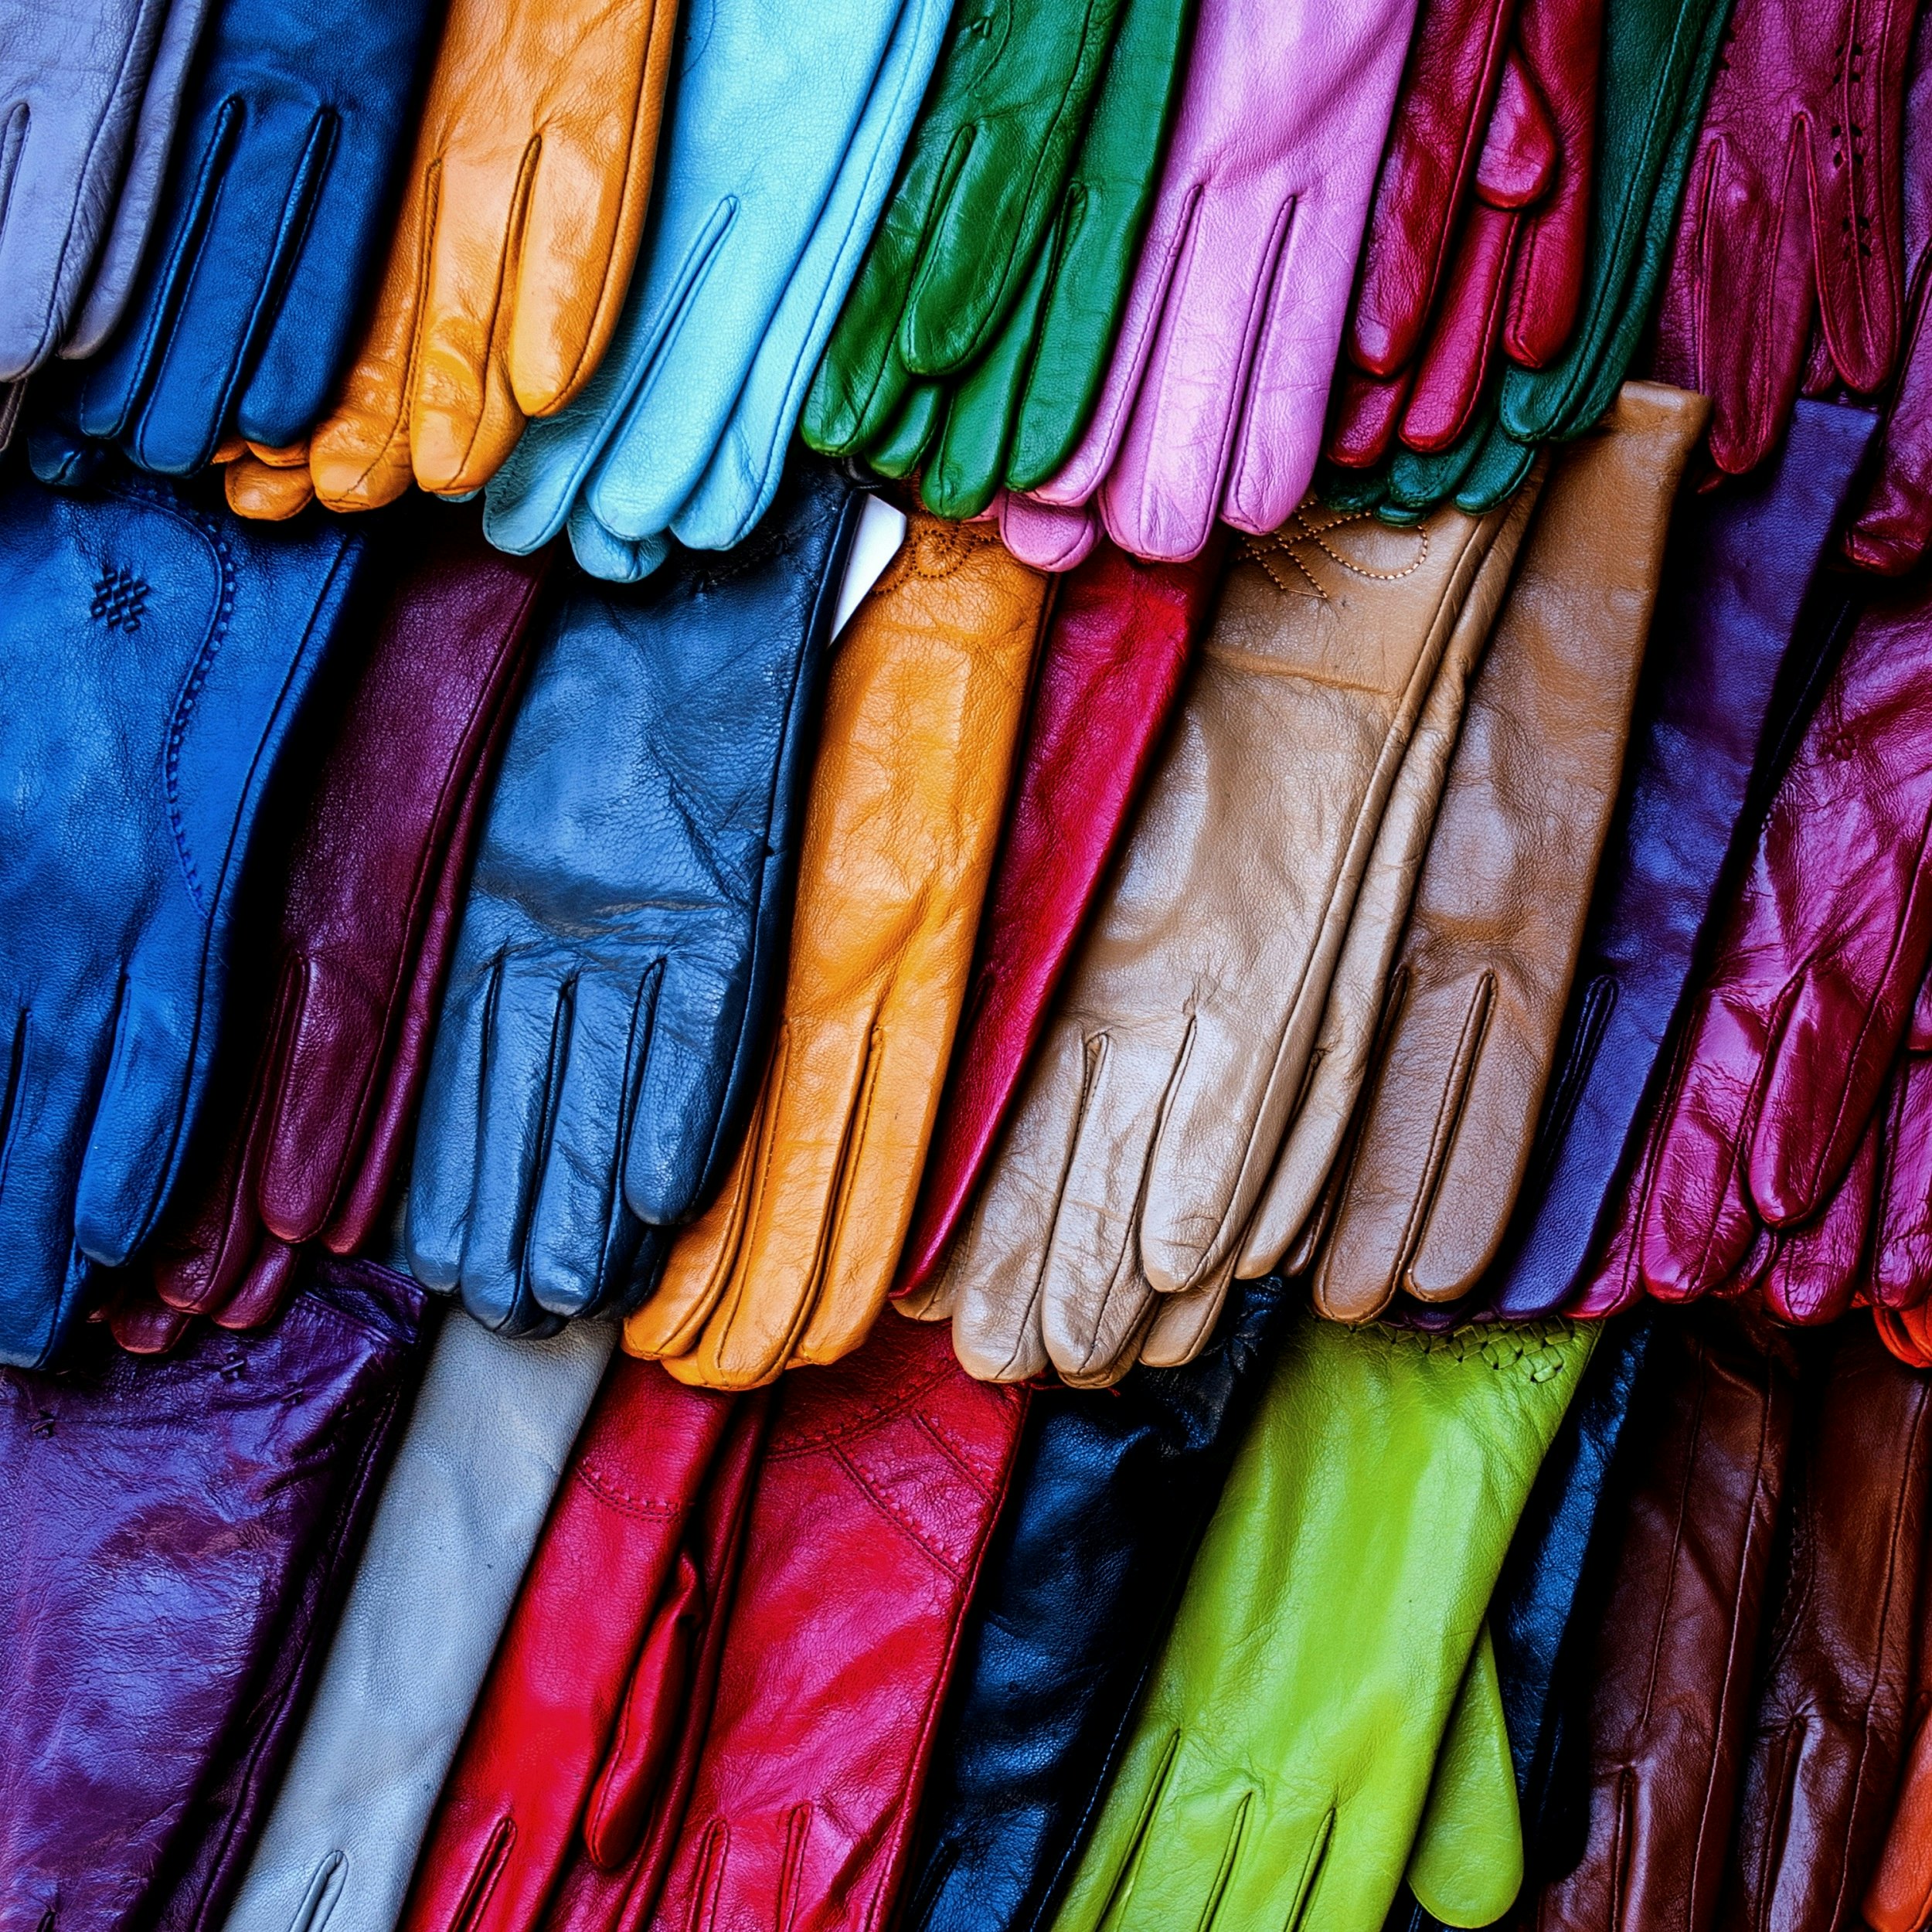 A series of brightly coloured leather gloves on display